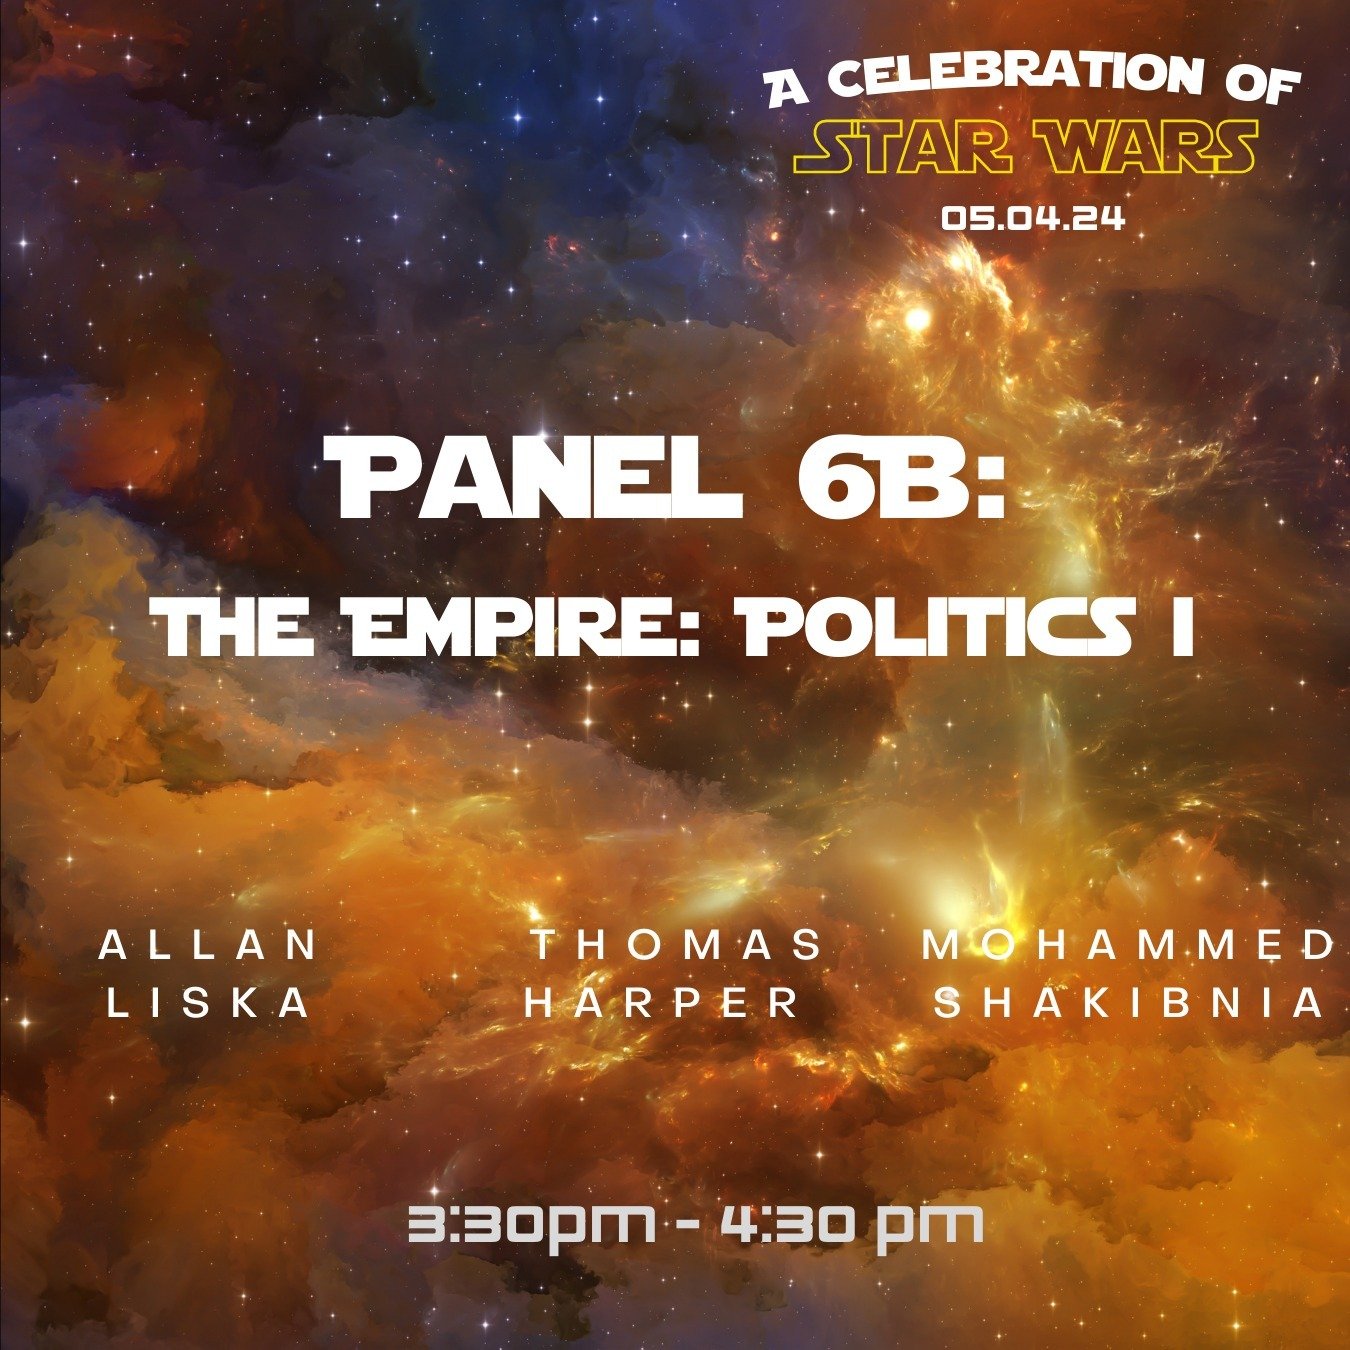 Panel 6B, &ldquo;The Empire: Politics I,&rdquo; will be taking place in Room 805 and online from 3:30 pm - 4:30 pm!